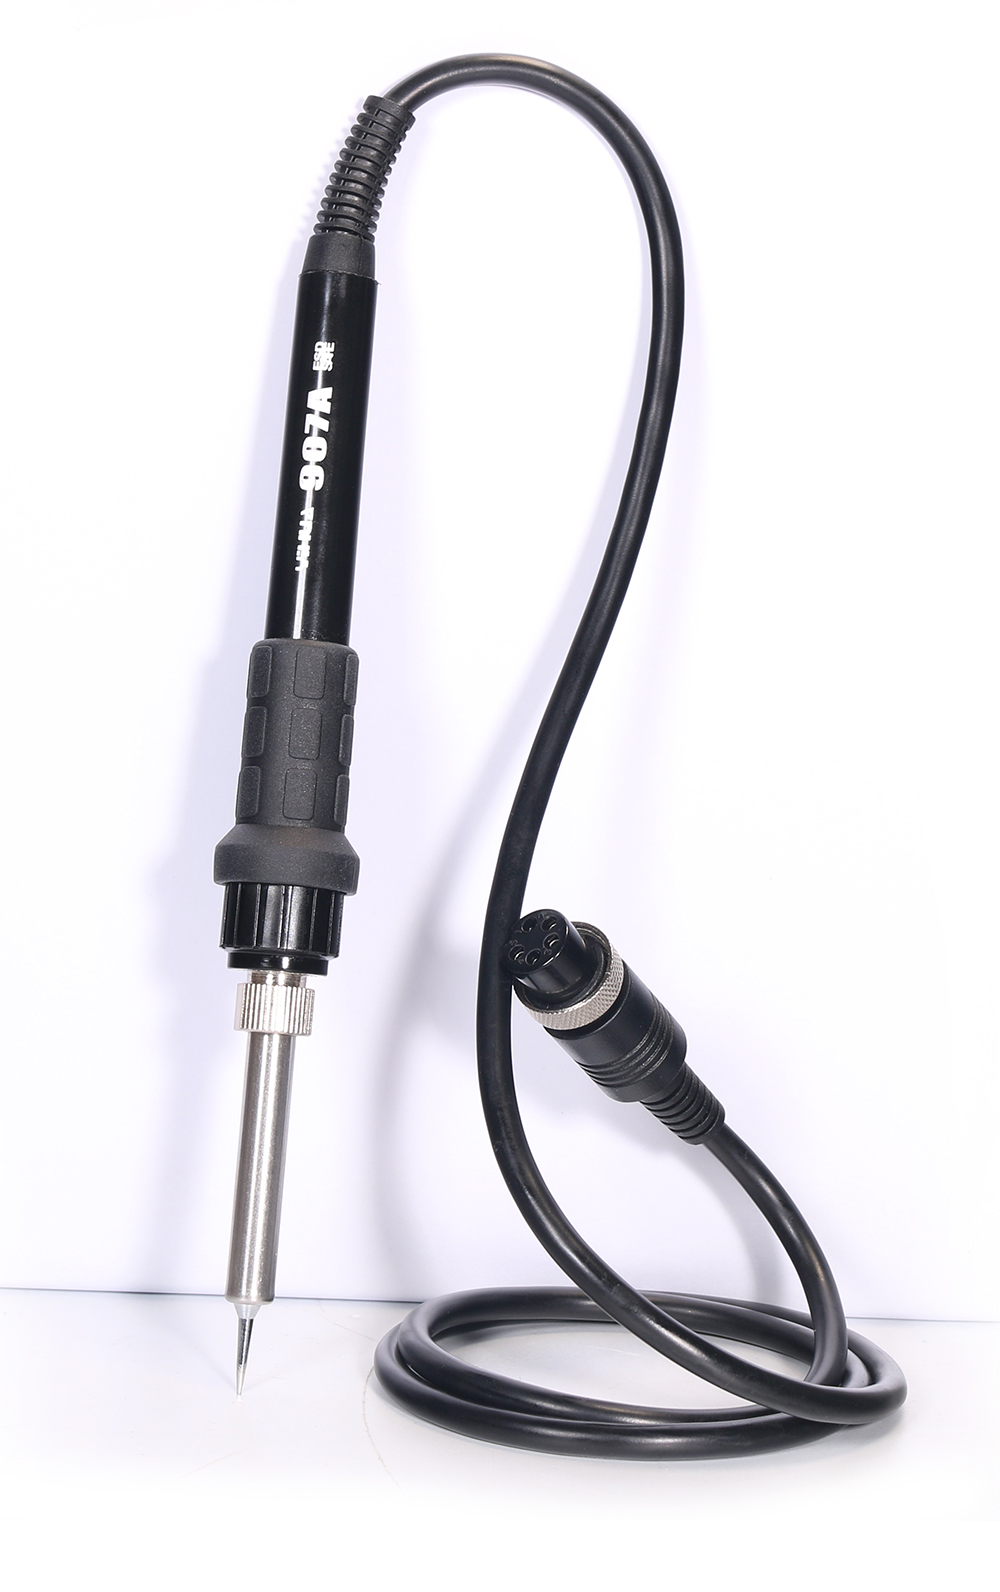 YIHUA 936 937D 939D+ 40W Soldering Iron Soldering Statio